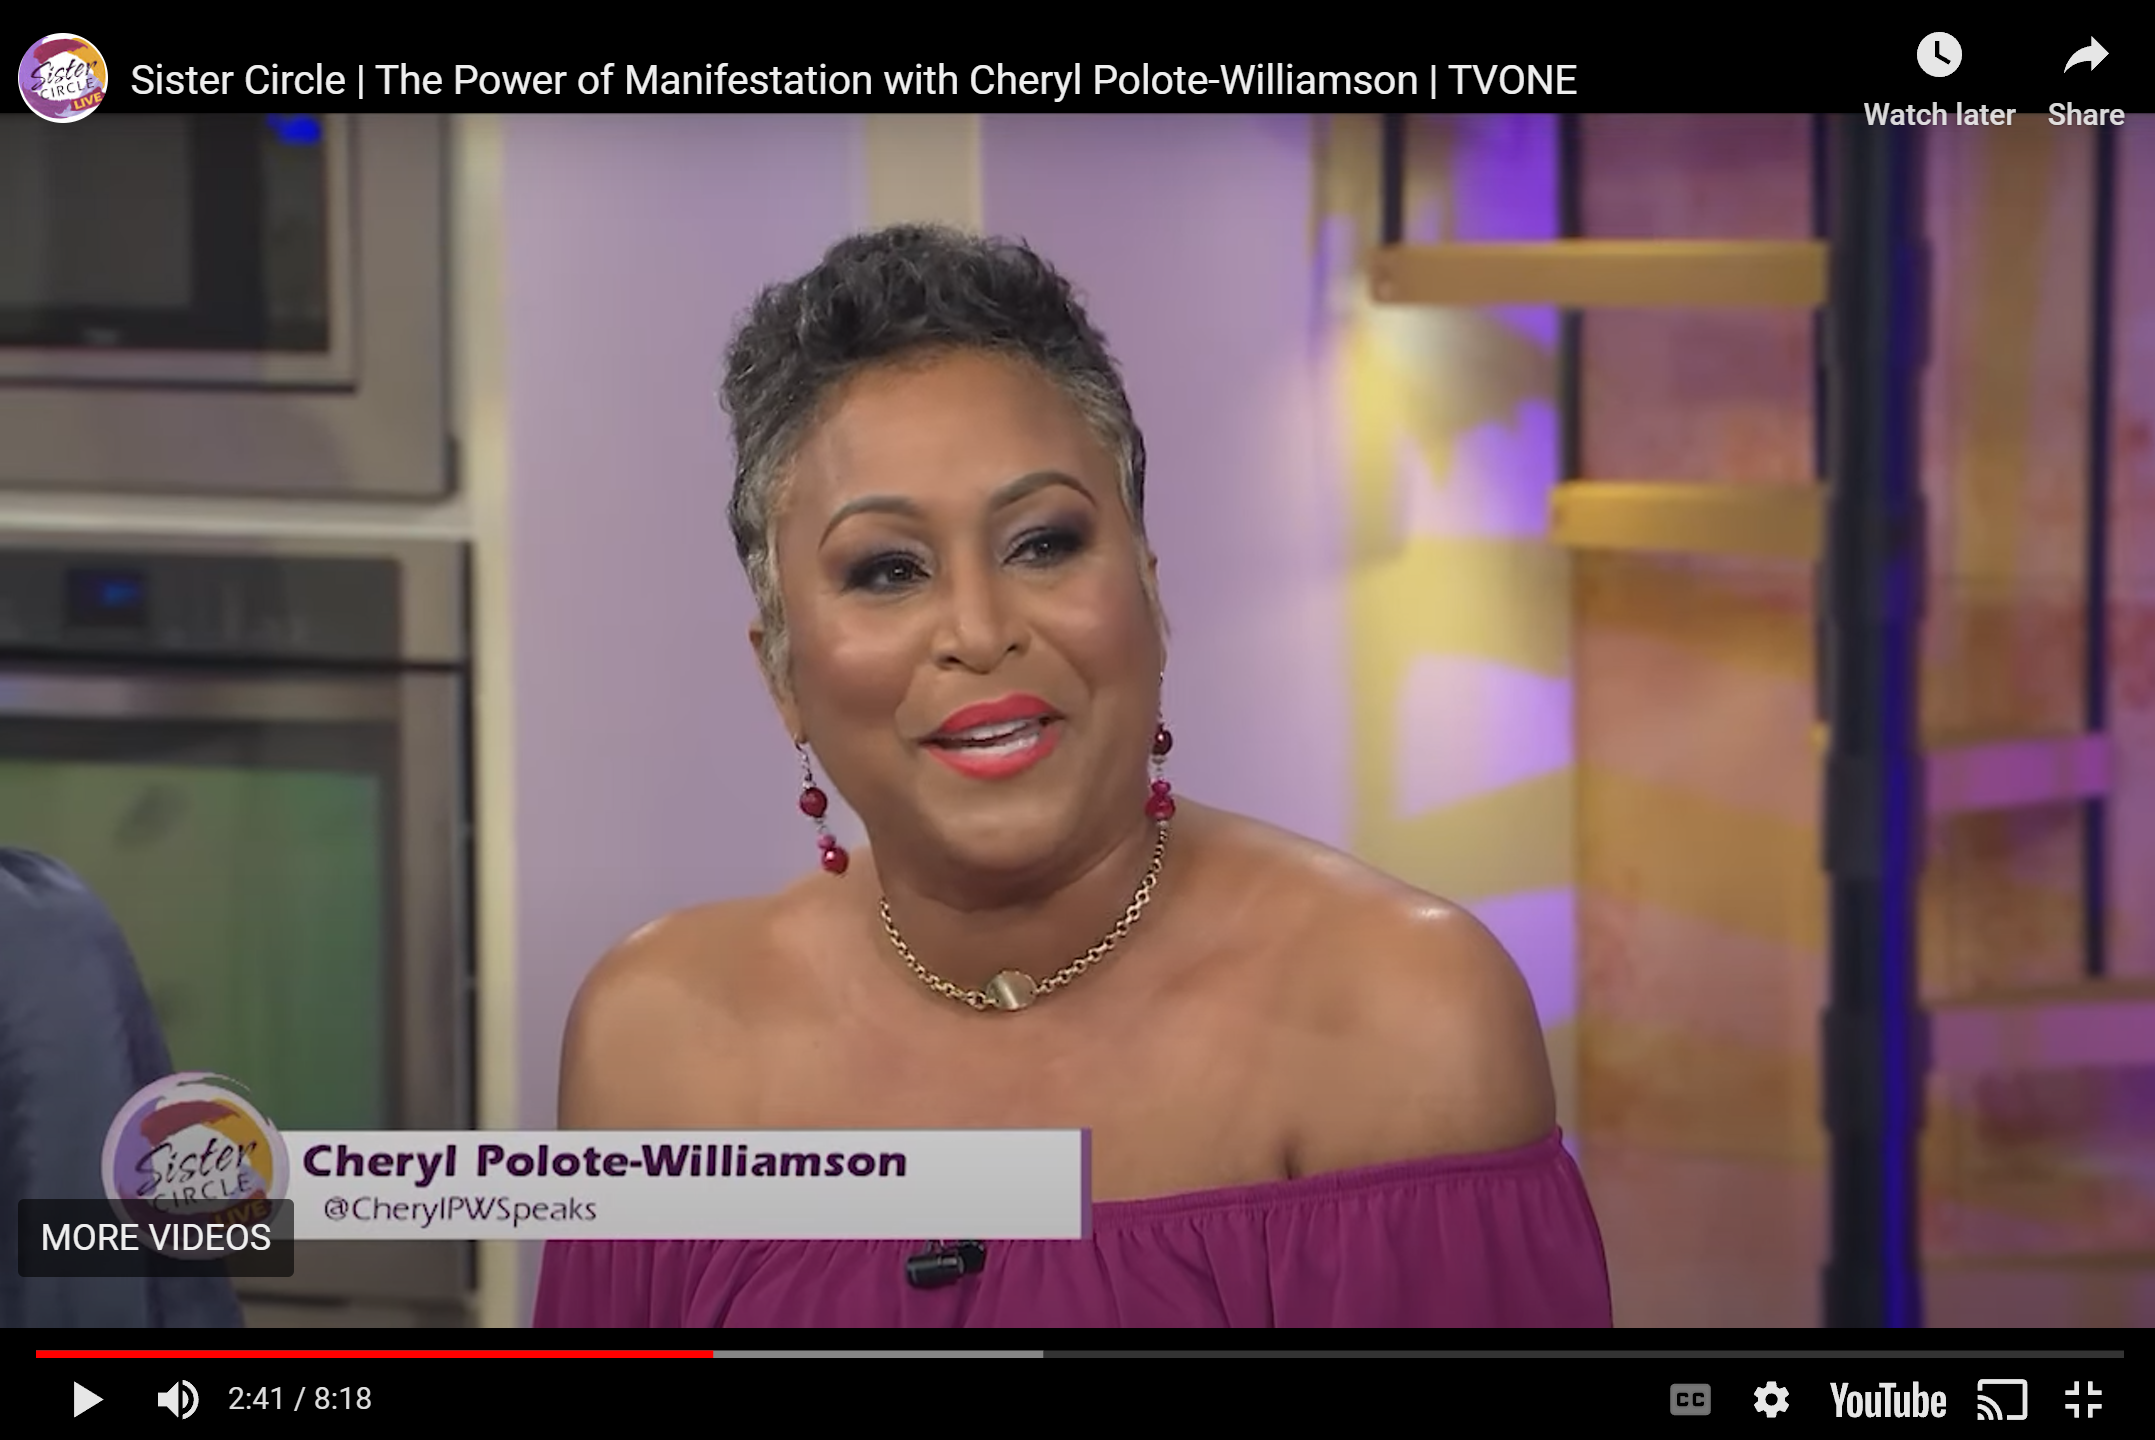 Sister Circle | The Power of Manifestation with Cheryl Polote-Williamson | TVONE